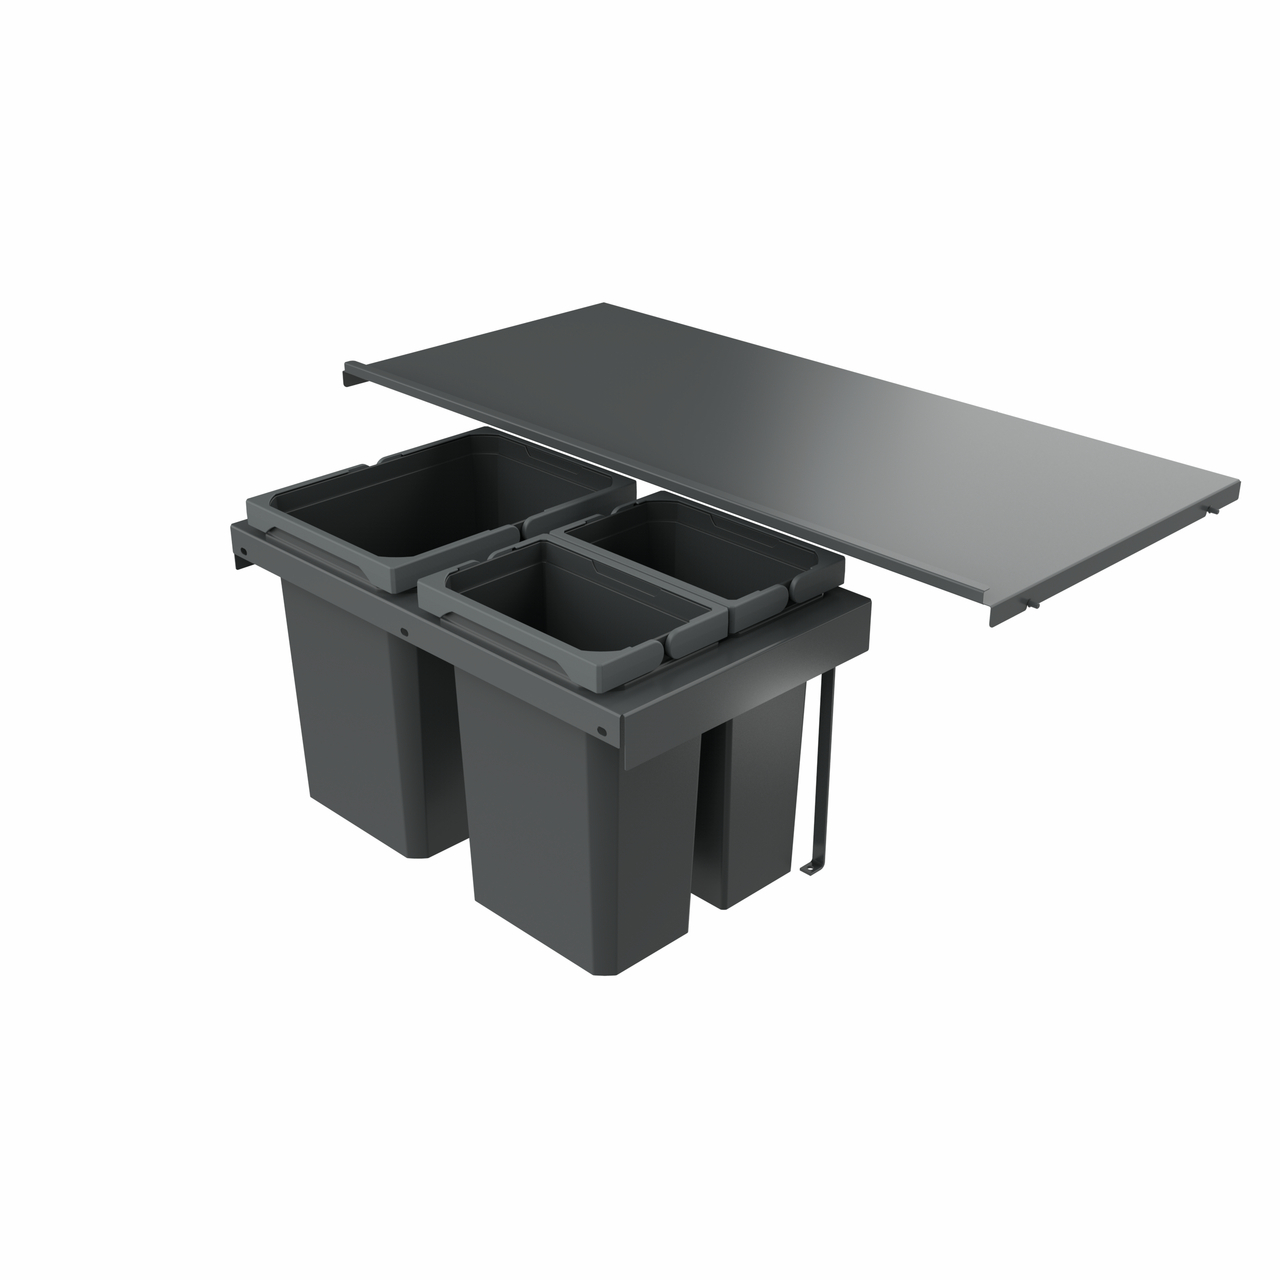  Cox Stand-UP® 350 K/900-3, anthracite, H 350 mm